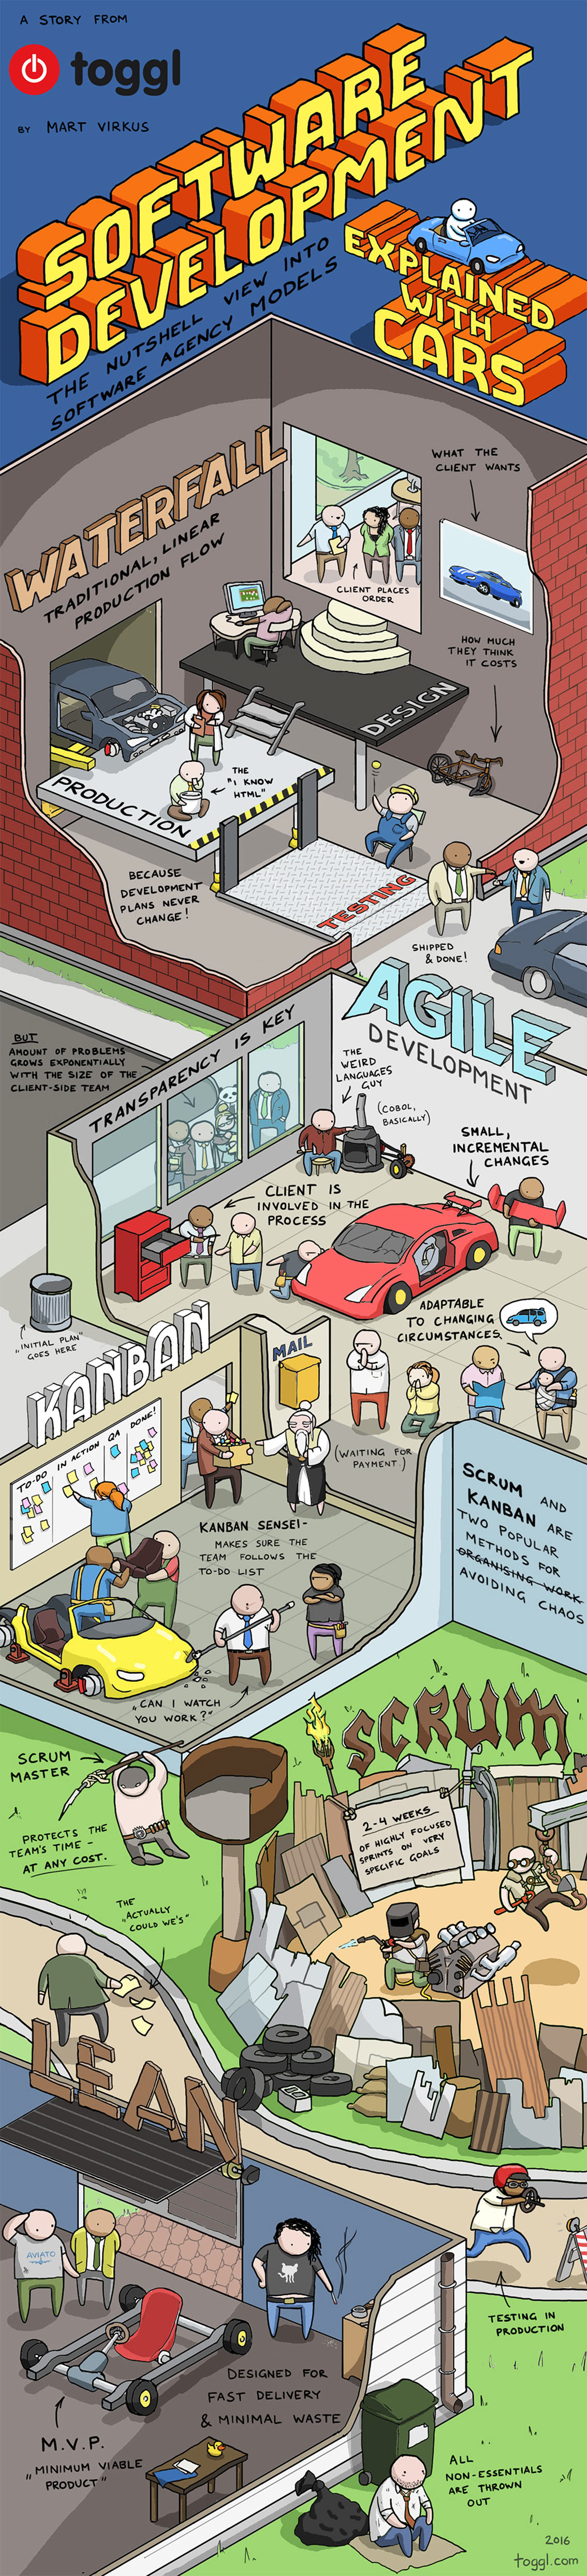 Software Development Explained with Cars - Startup Infographic